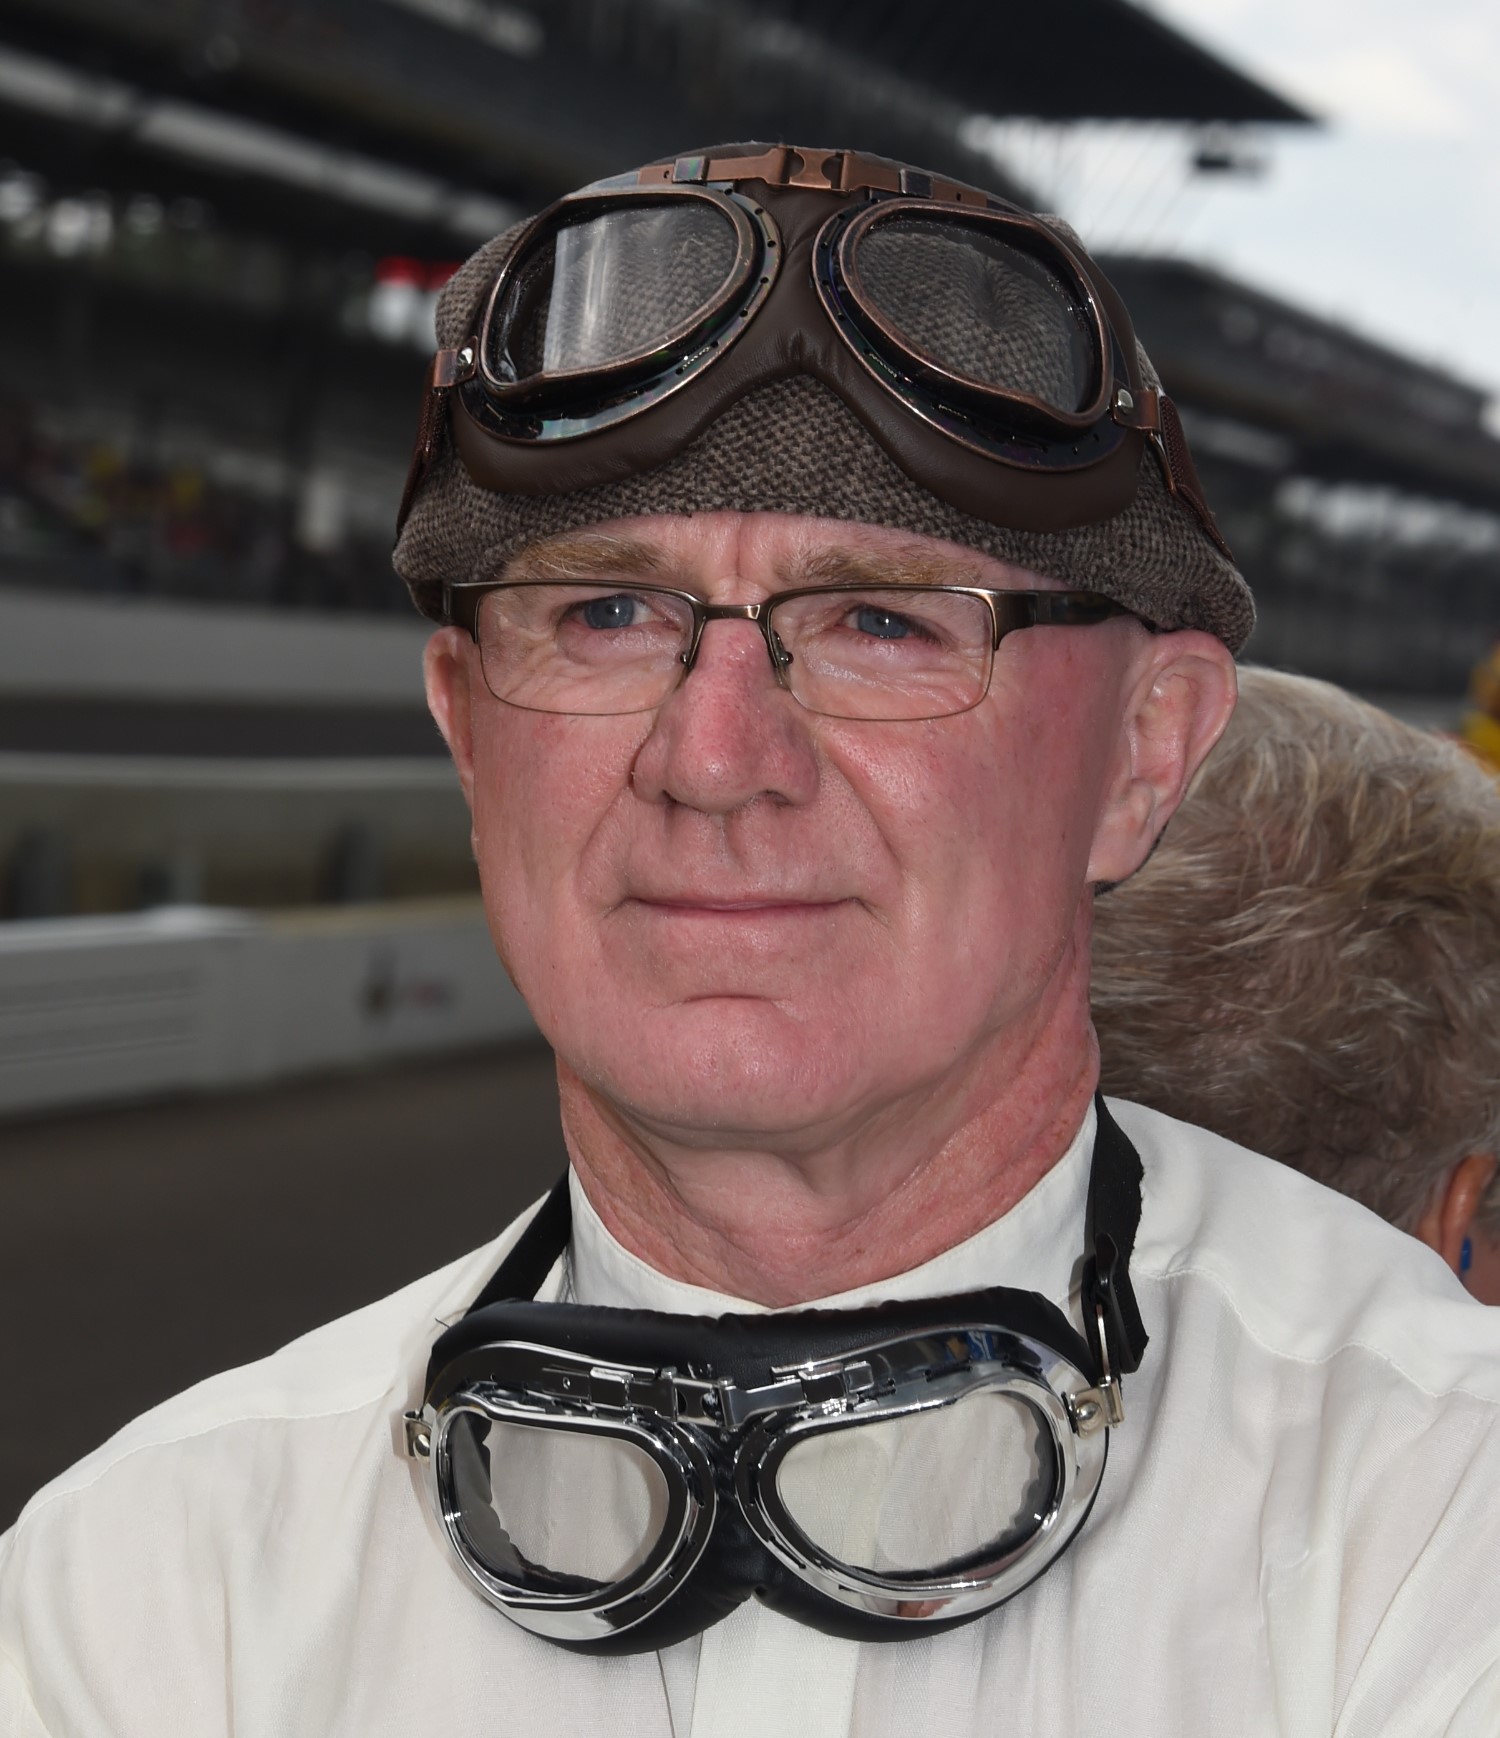 Derek, dressed in vintage race gear for the 100th Running of the Indianapolis 500